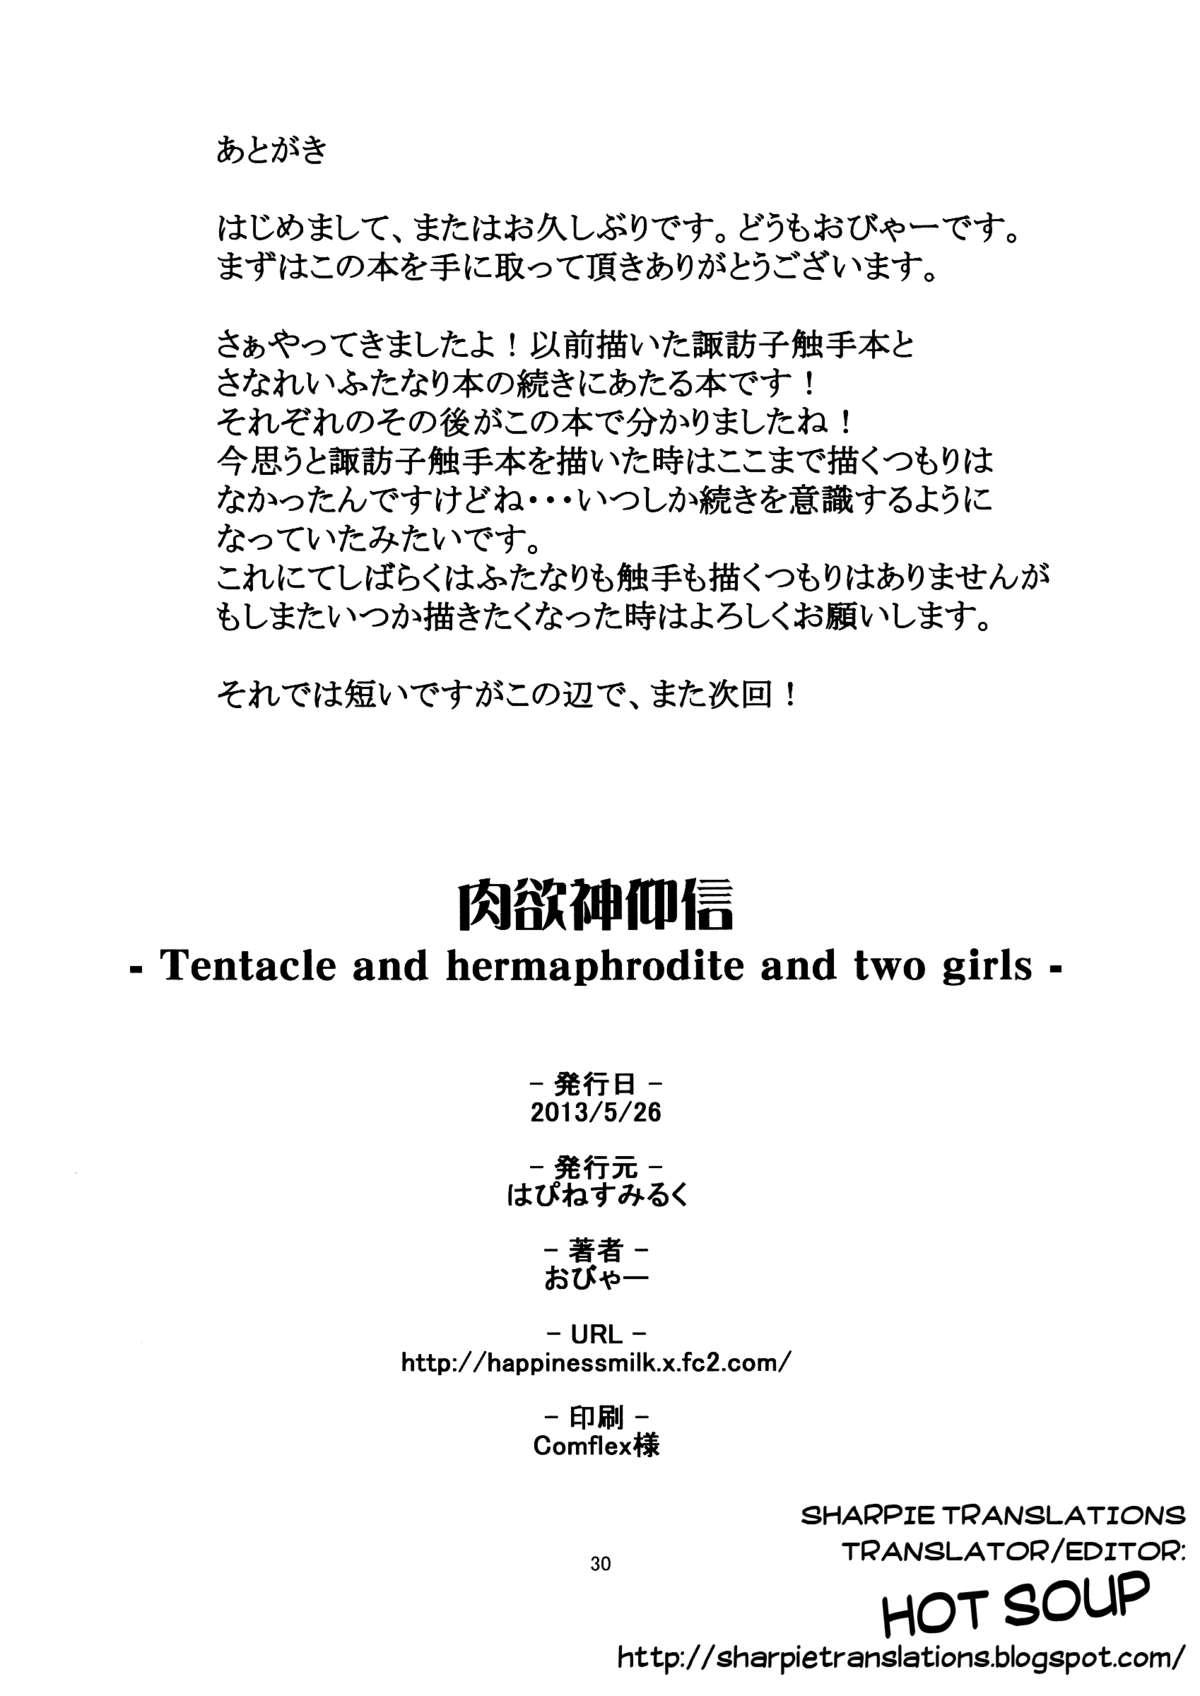 (Reitaisai 10) [Happiness Milk (Obyaa)] Nikuyokugami Gyoushin - tentacle and hermaphrodite and two girls - | Faith in the God of Carnal Desire - Tentacle and Hermaphrodite and Two Girls (Touhou Project) [English] {Sharpie Translations} 27